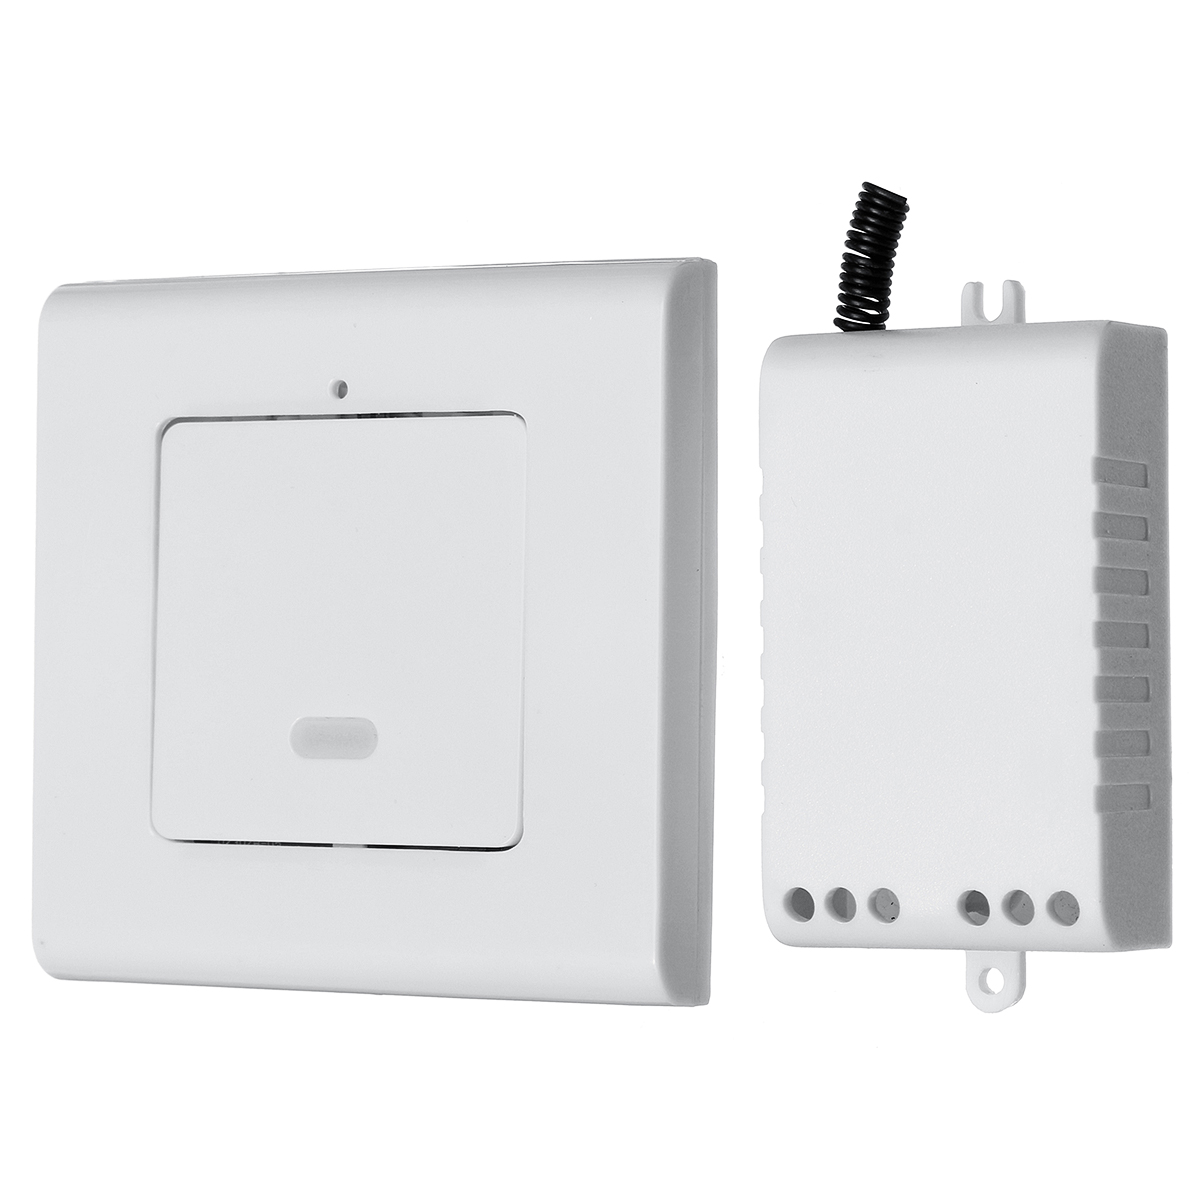 1-Way-Wall-Lamp-Wireless-Remote-Control-ONOFF-Light-Switch---Receiver-AC220V-1296321